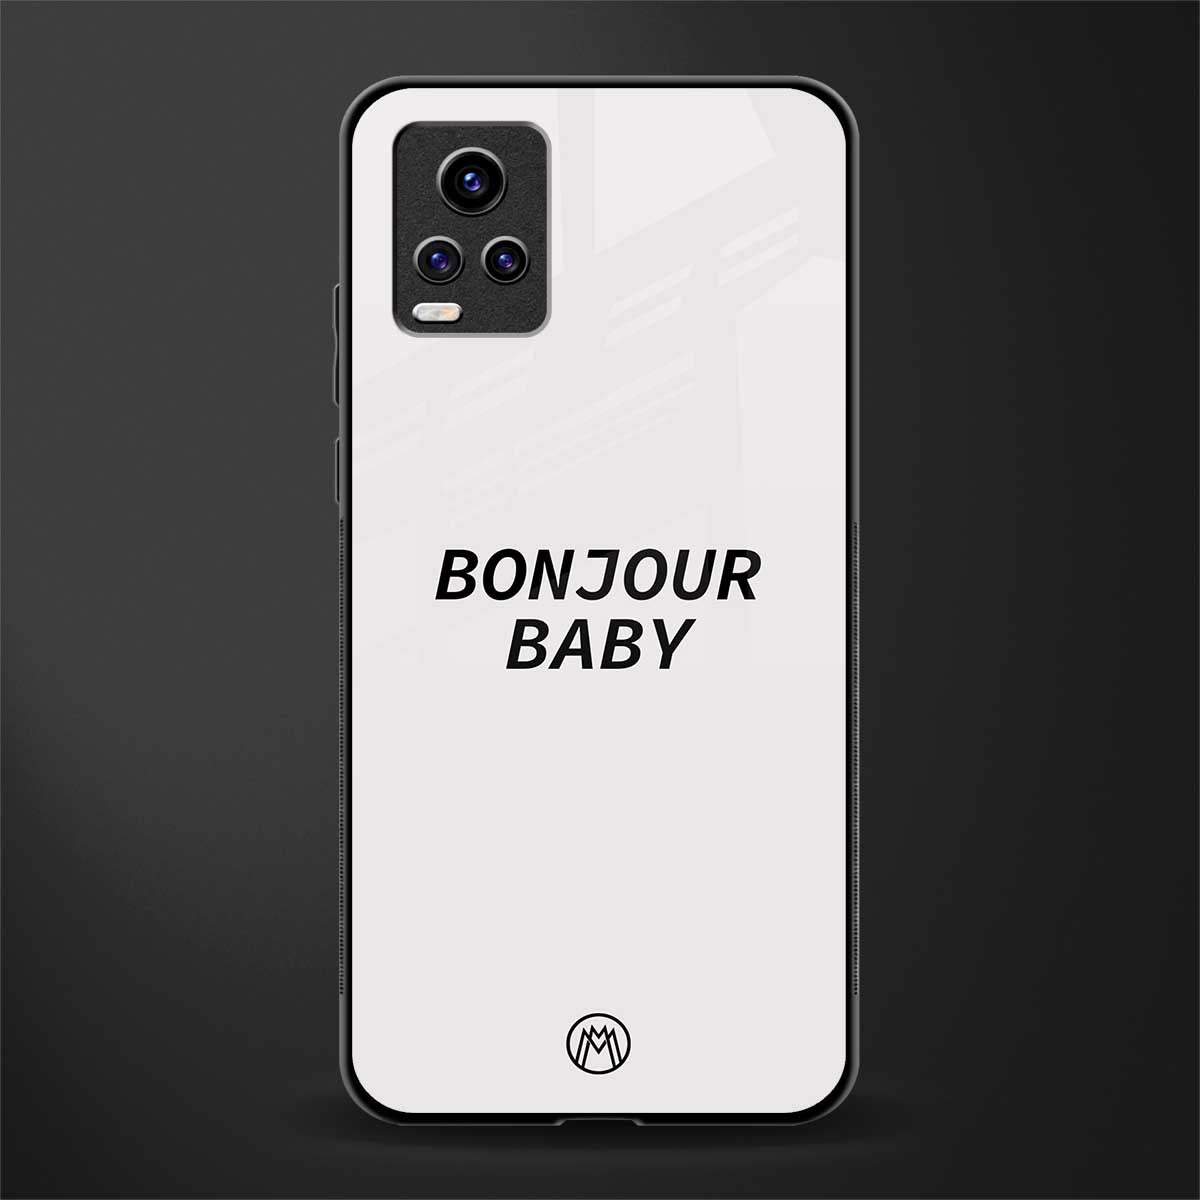 bonjour baby back phone cover | glass case for vivo y73